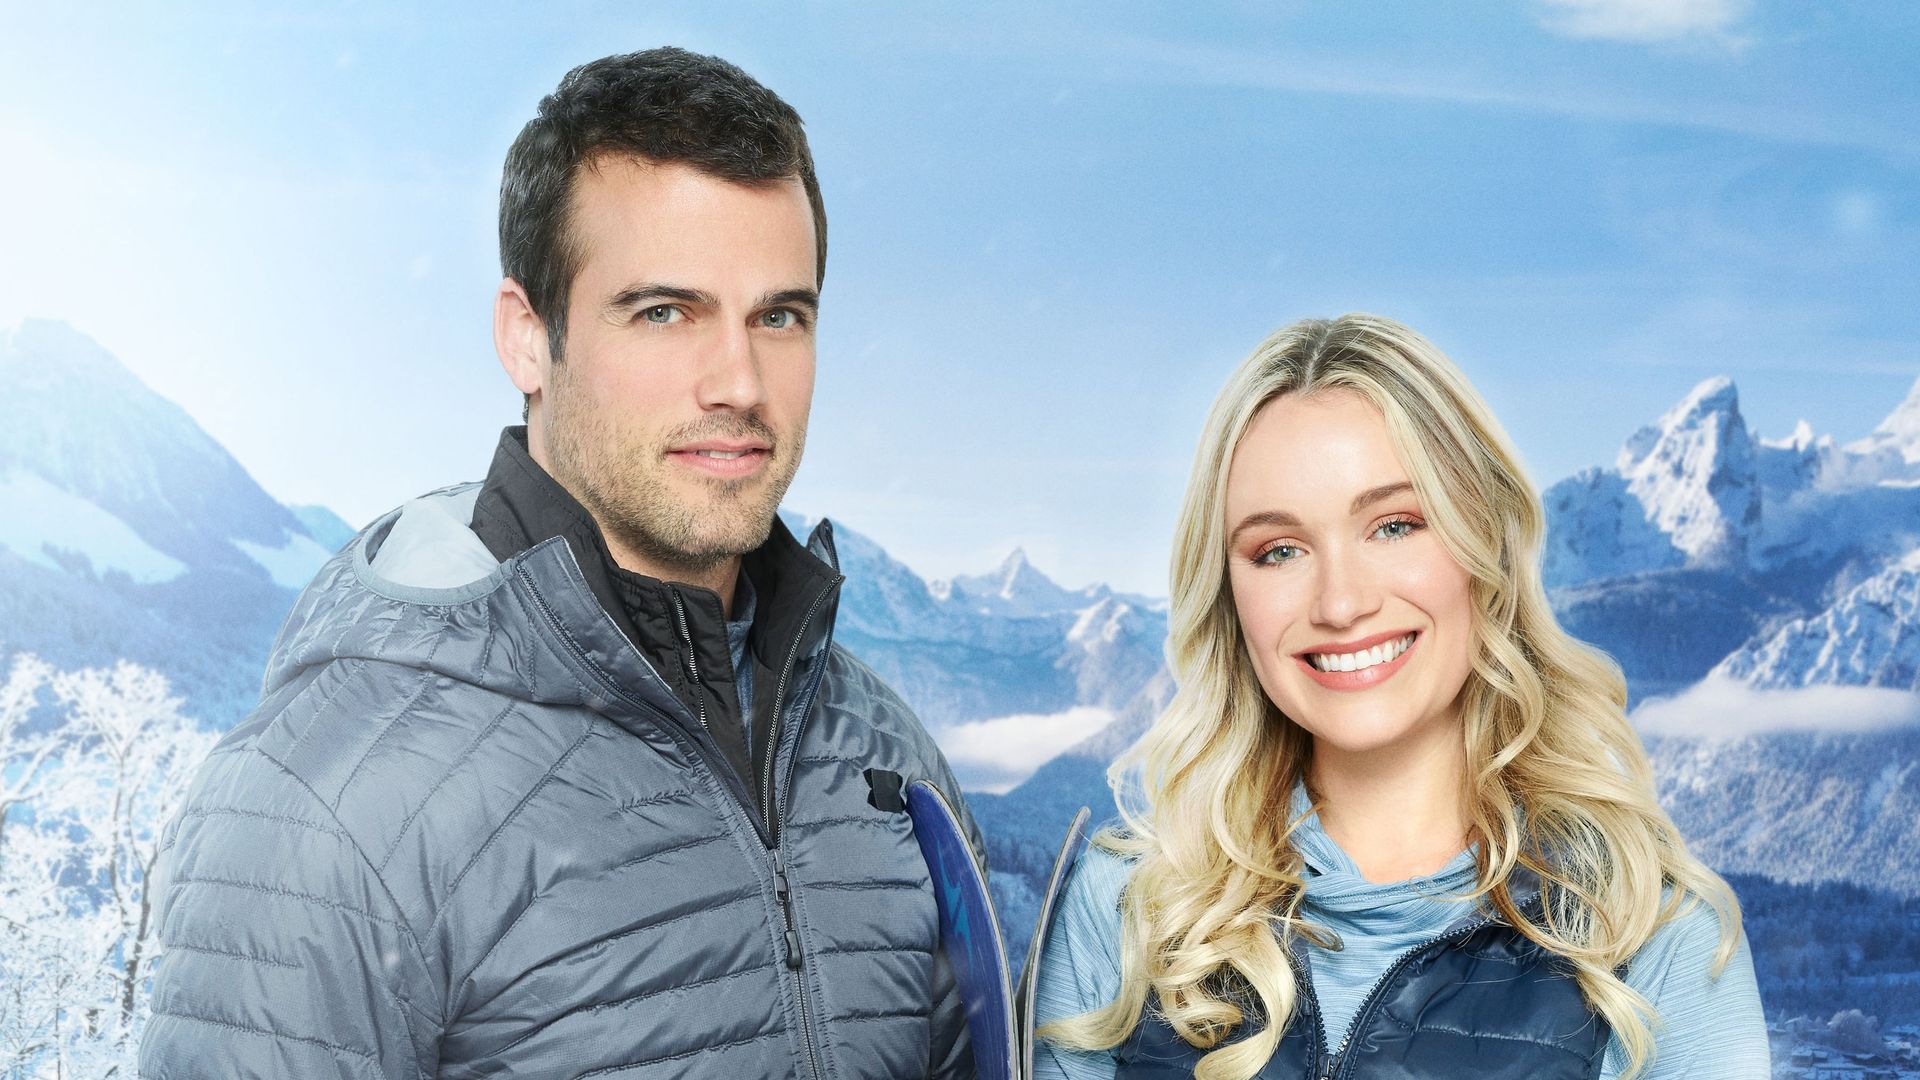 Love on the Slopes background